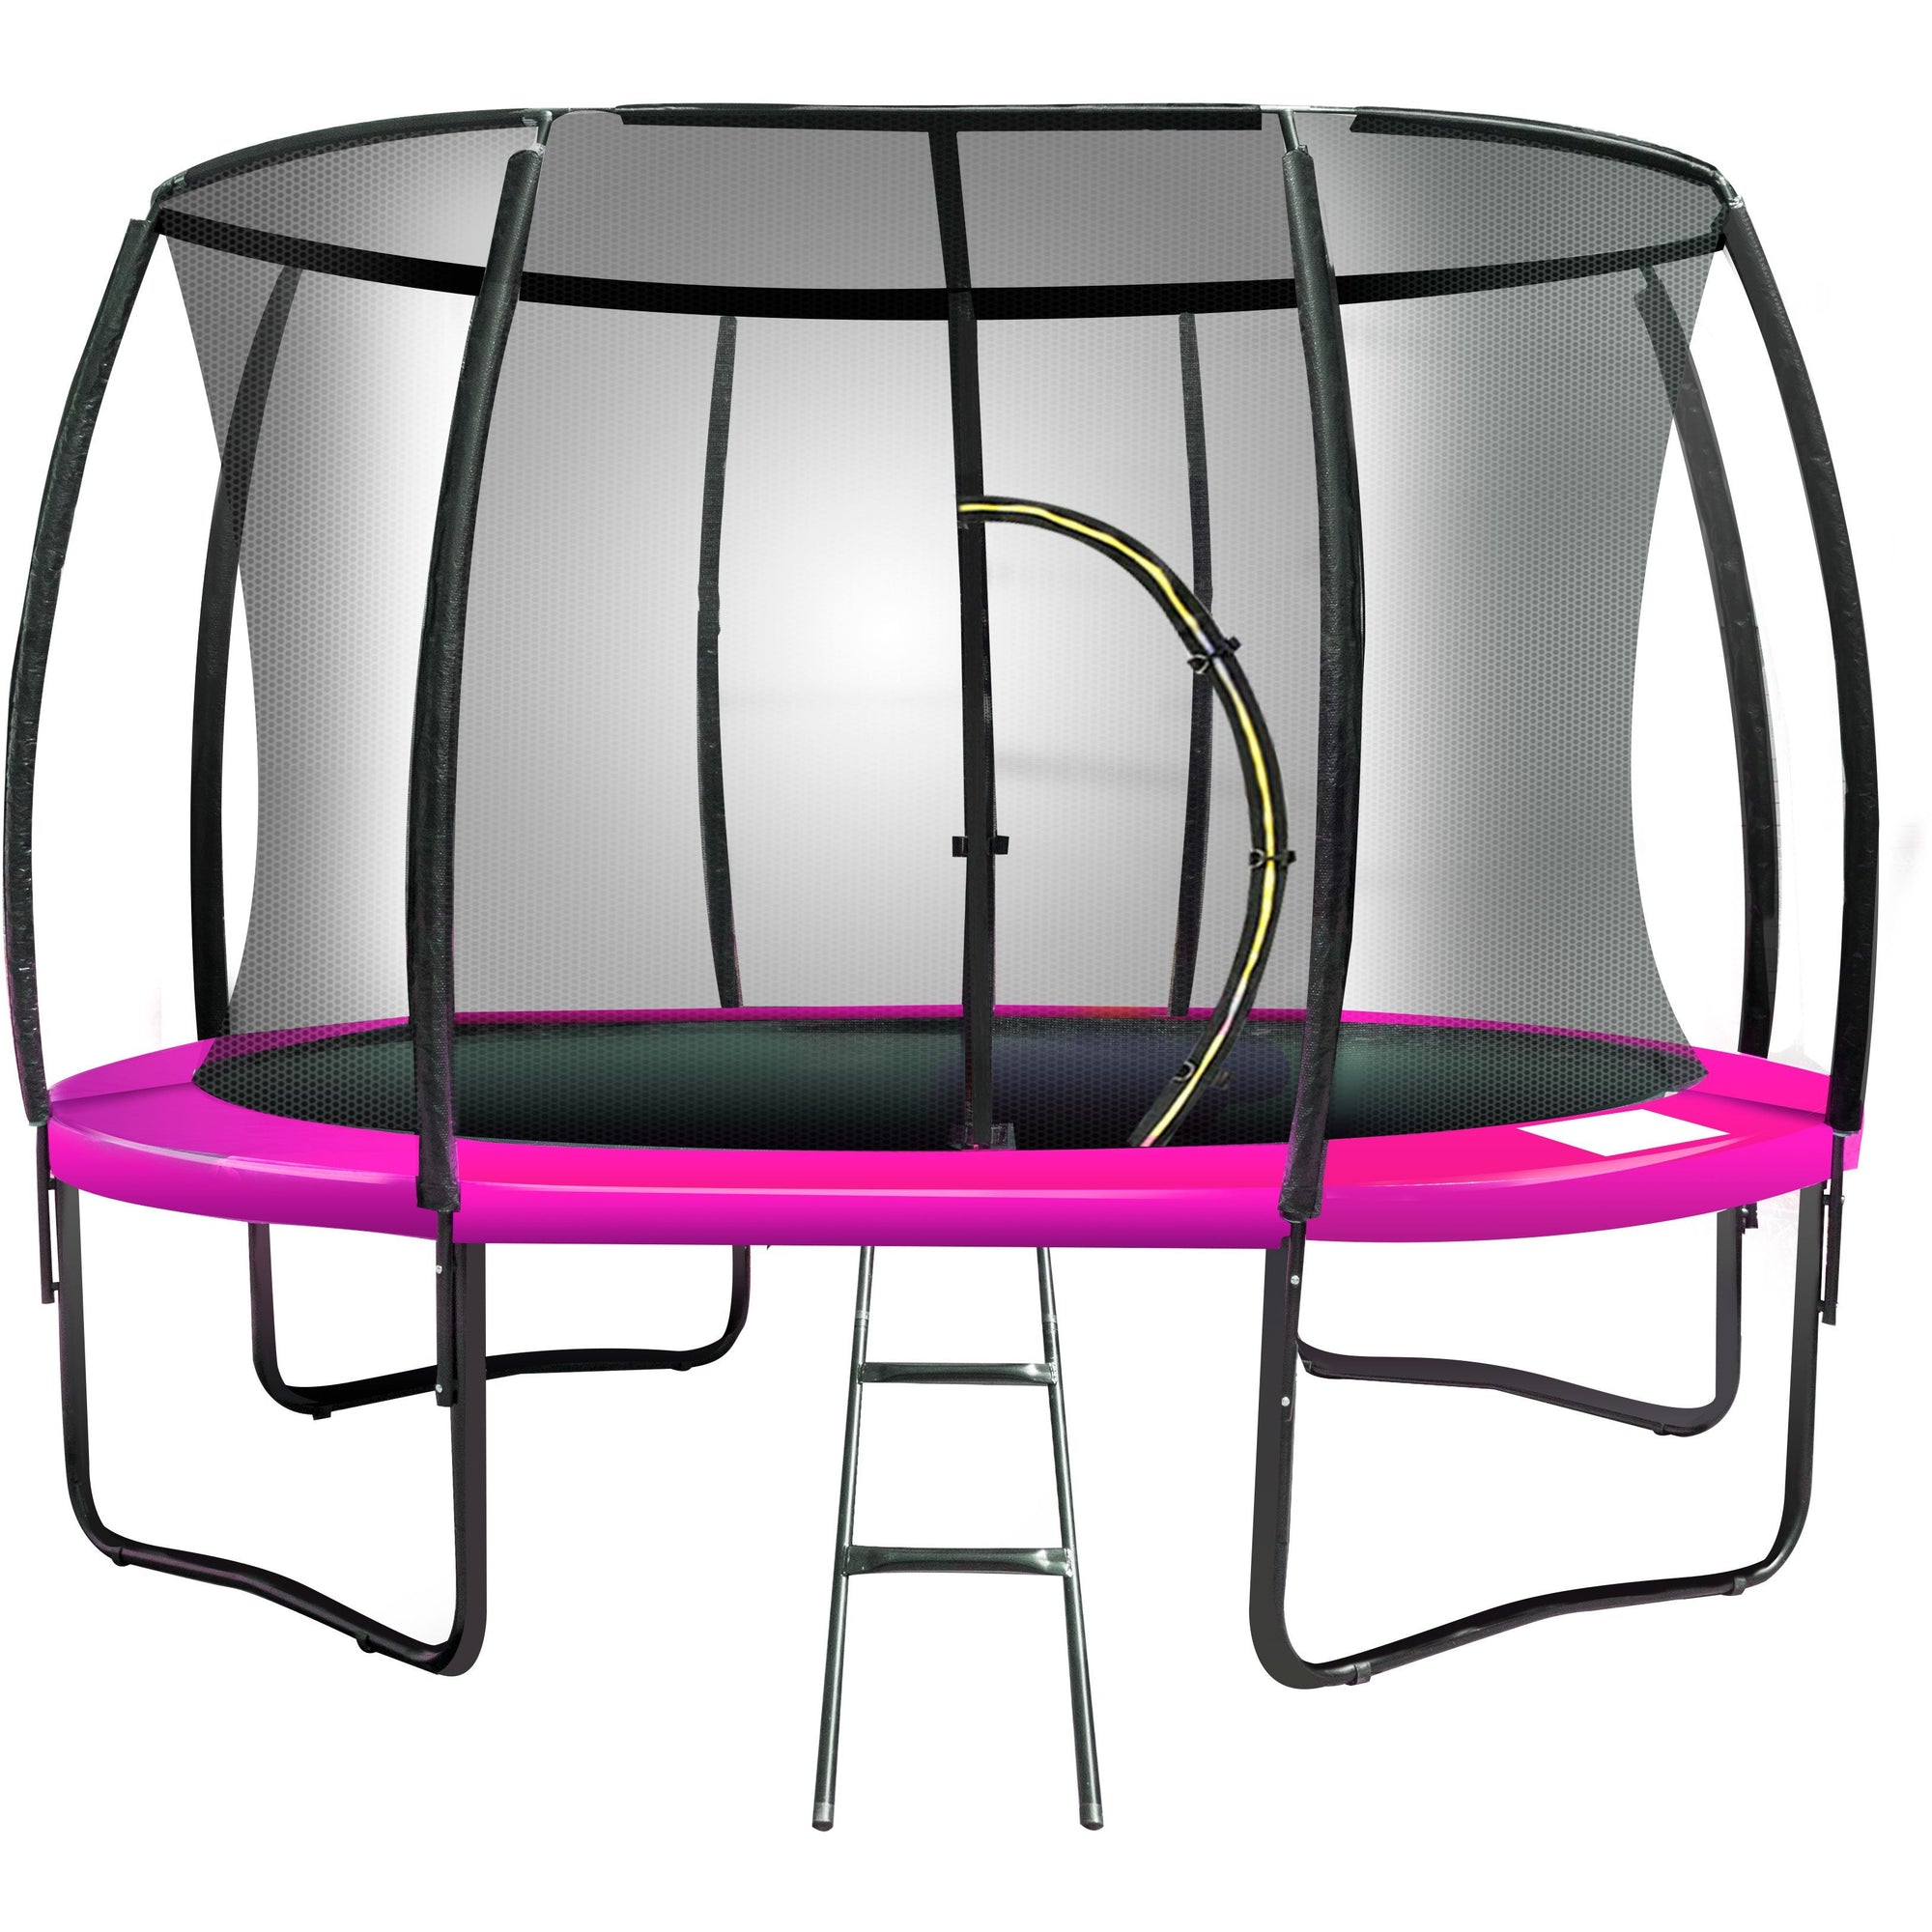 Kahuna 12ft Trampoline Free Ladder Spring Mat Net Safety Pad Cover Round Enclosure - Pink